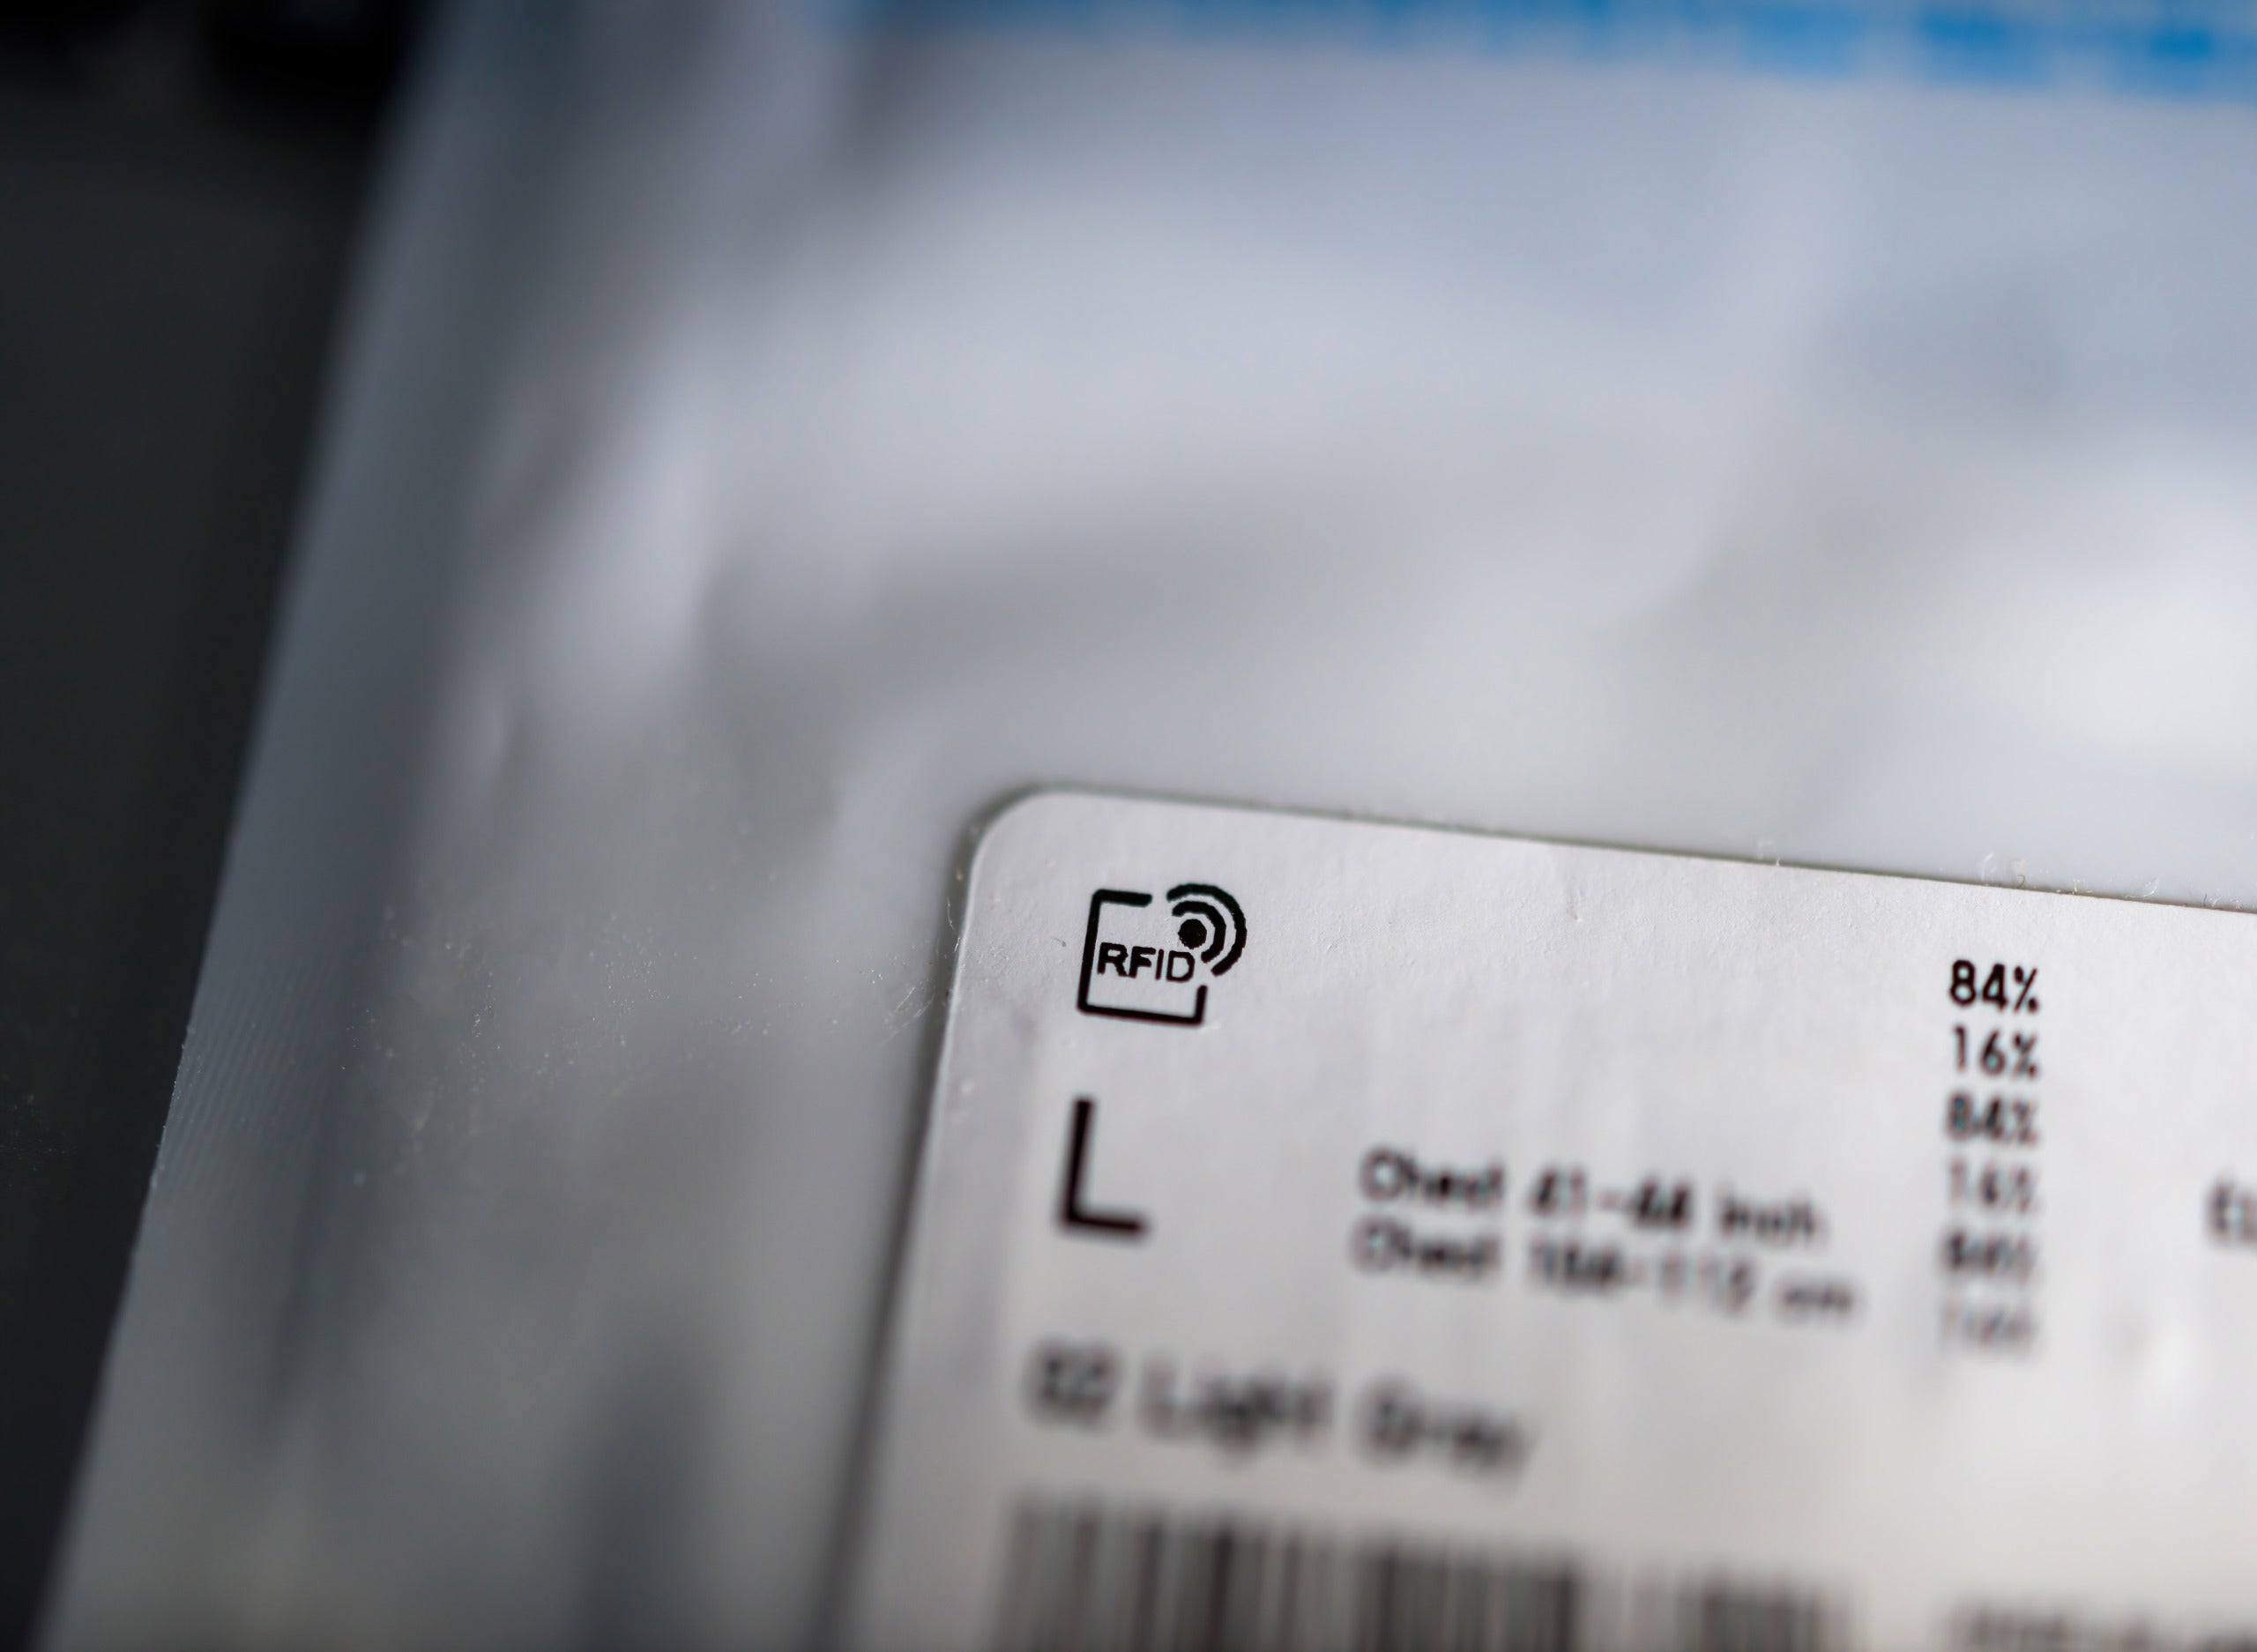 Smart Labeling: The Future of Product Information and Engagement